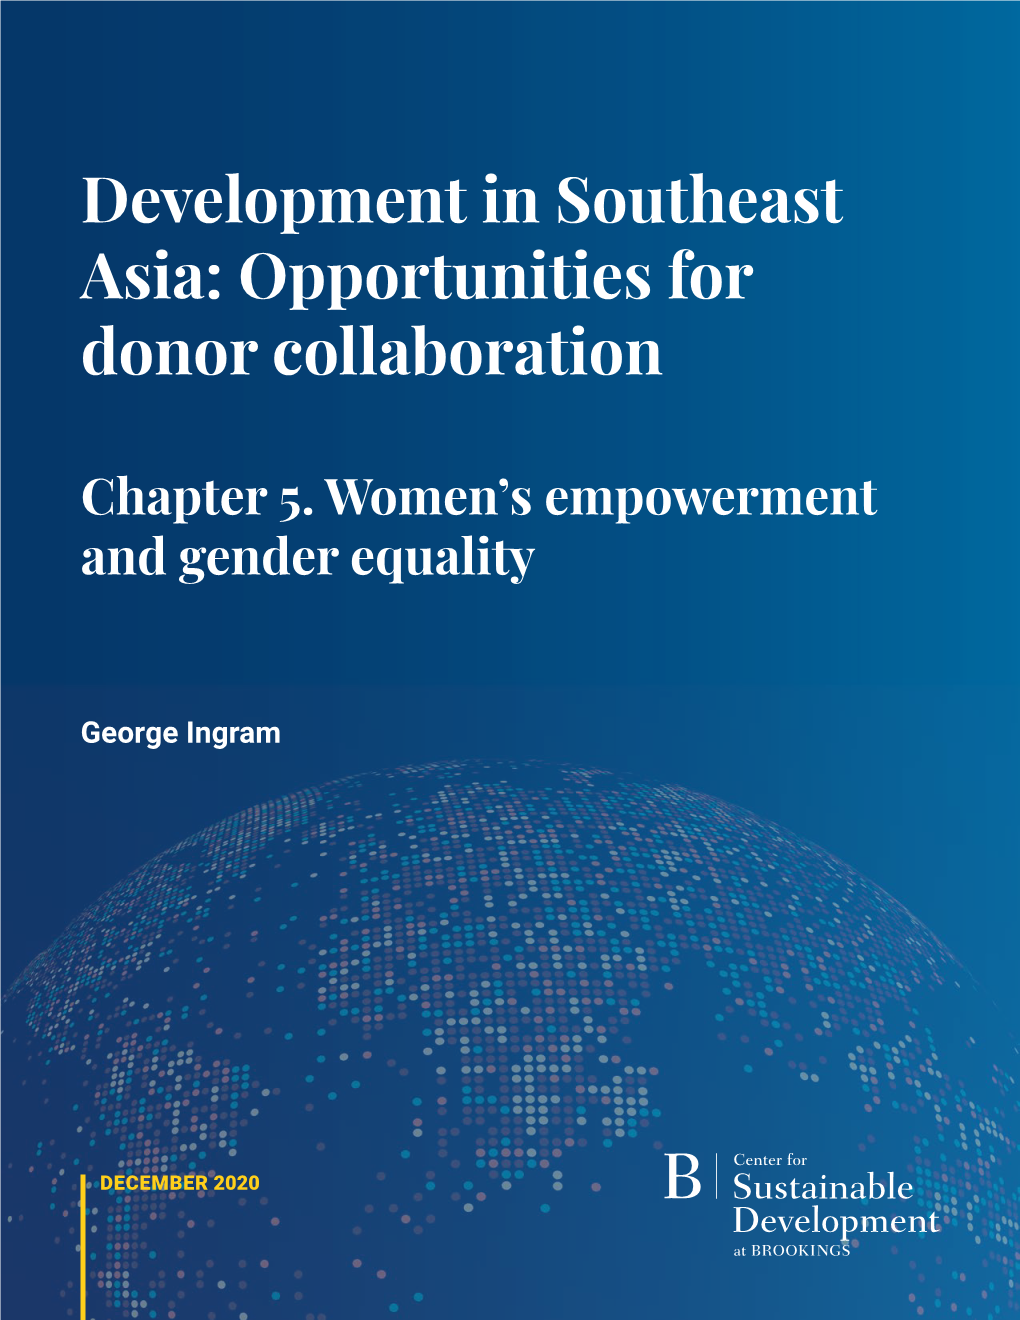 Development in Southeast Asia: Opportunities for Donor Collaboration